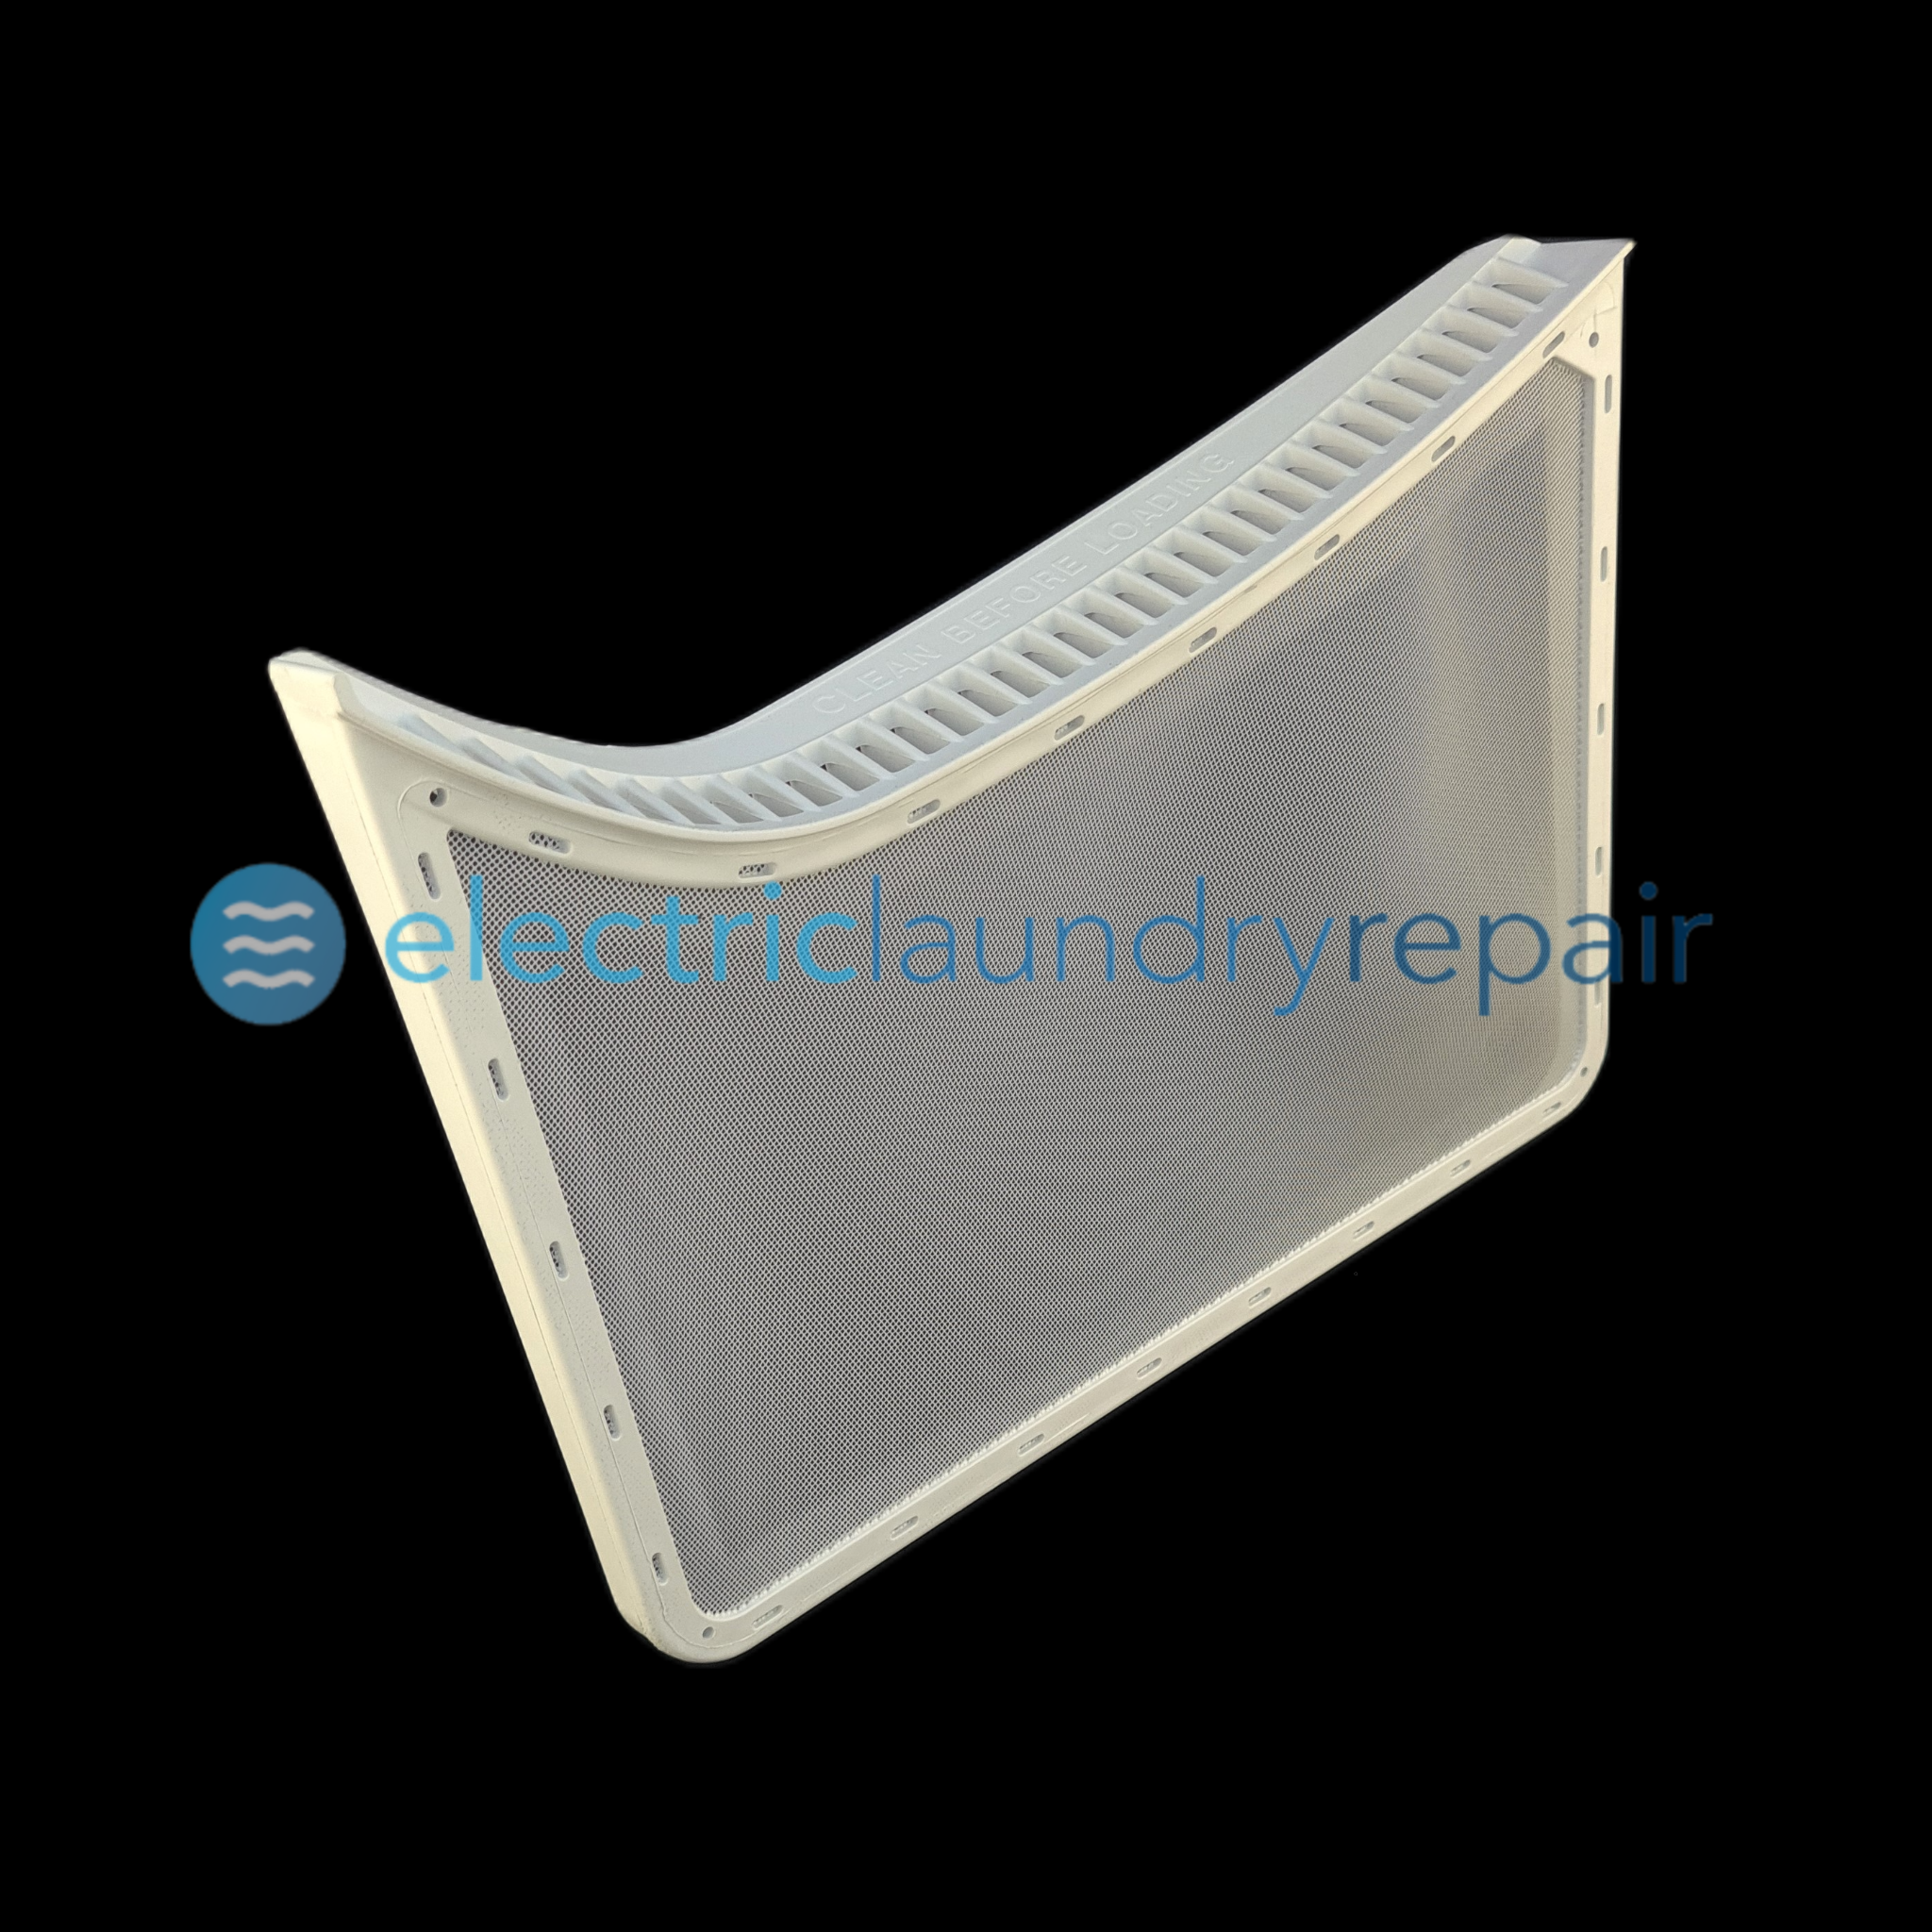 Maytag Dryer Screen (Filter), Lint Replacement Part www.electriclaundryrepair.co.nz